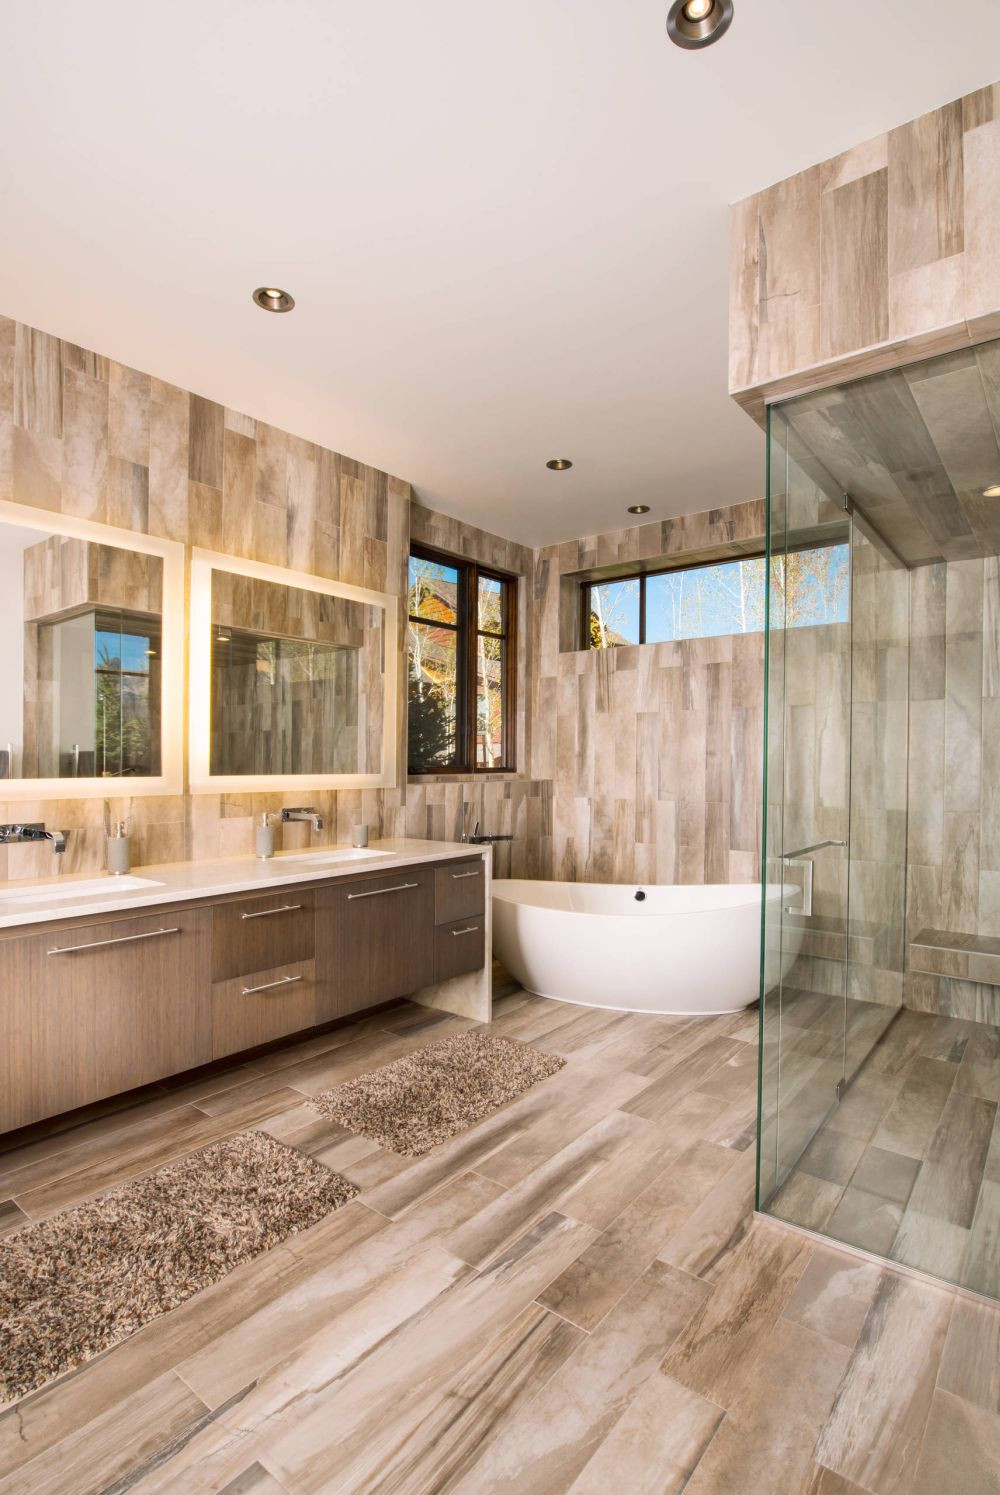 Wood Tile In Bathrooms
 15 Wood Tile Showers For Your Bathroom